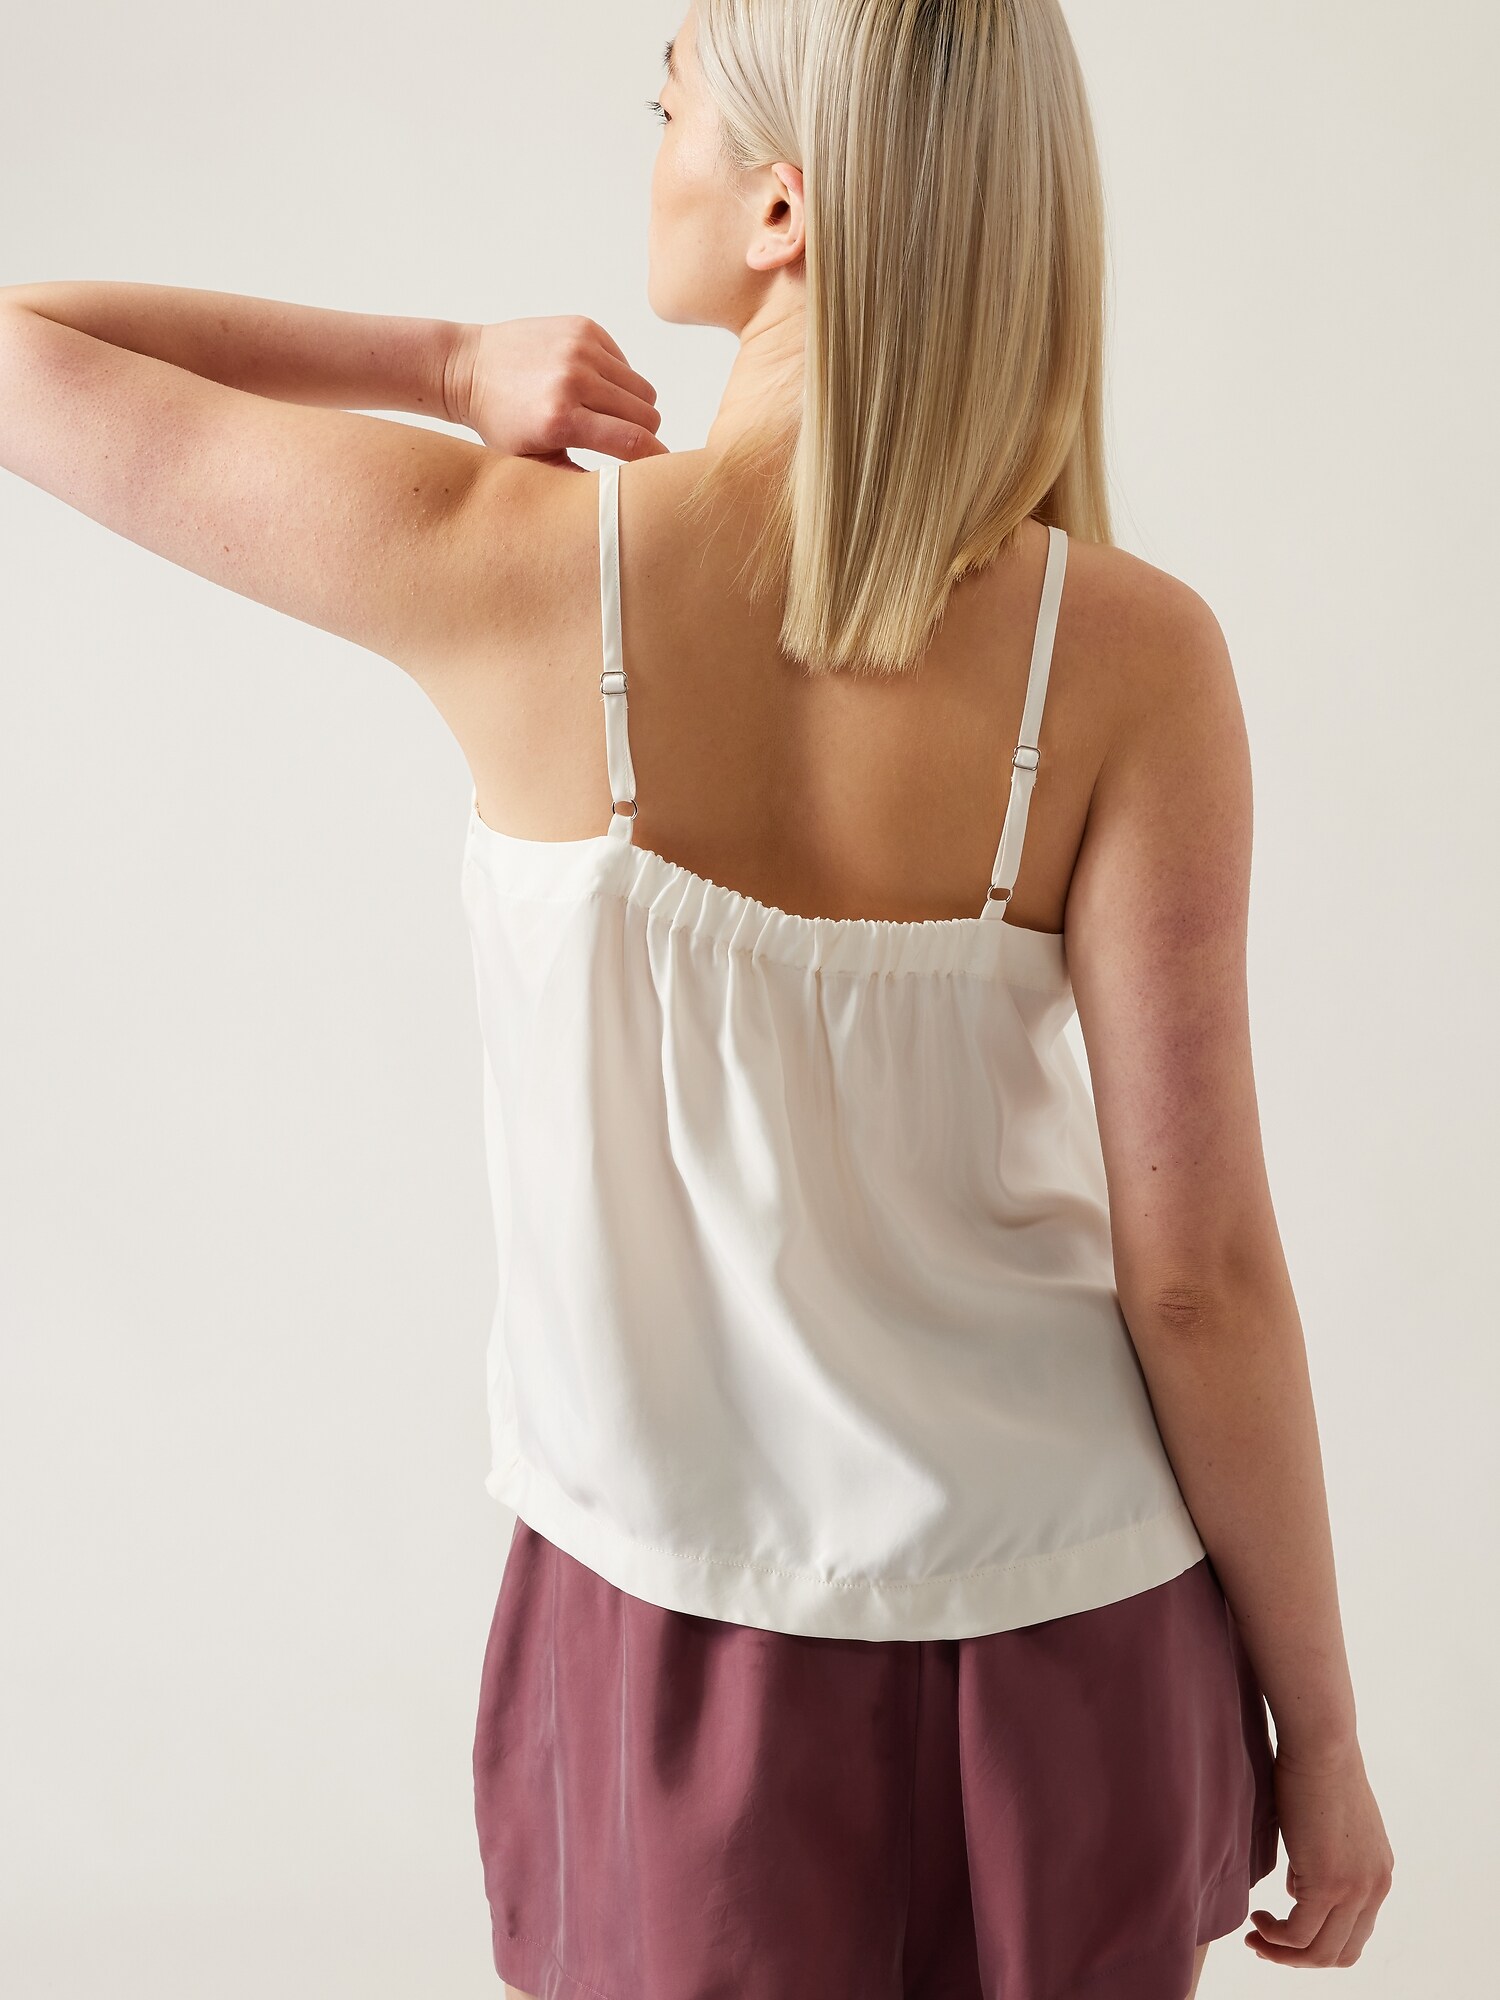 Get Ready for Summer with Stylish Cami Tops